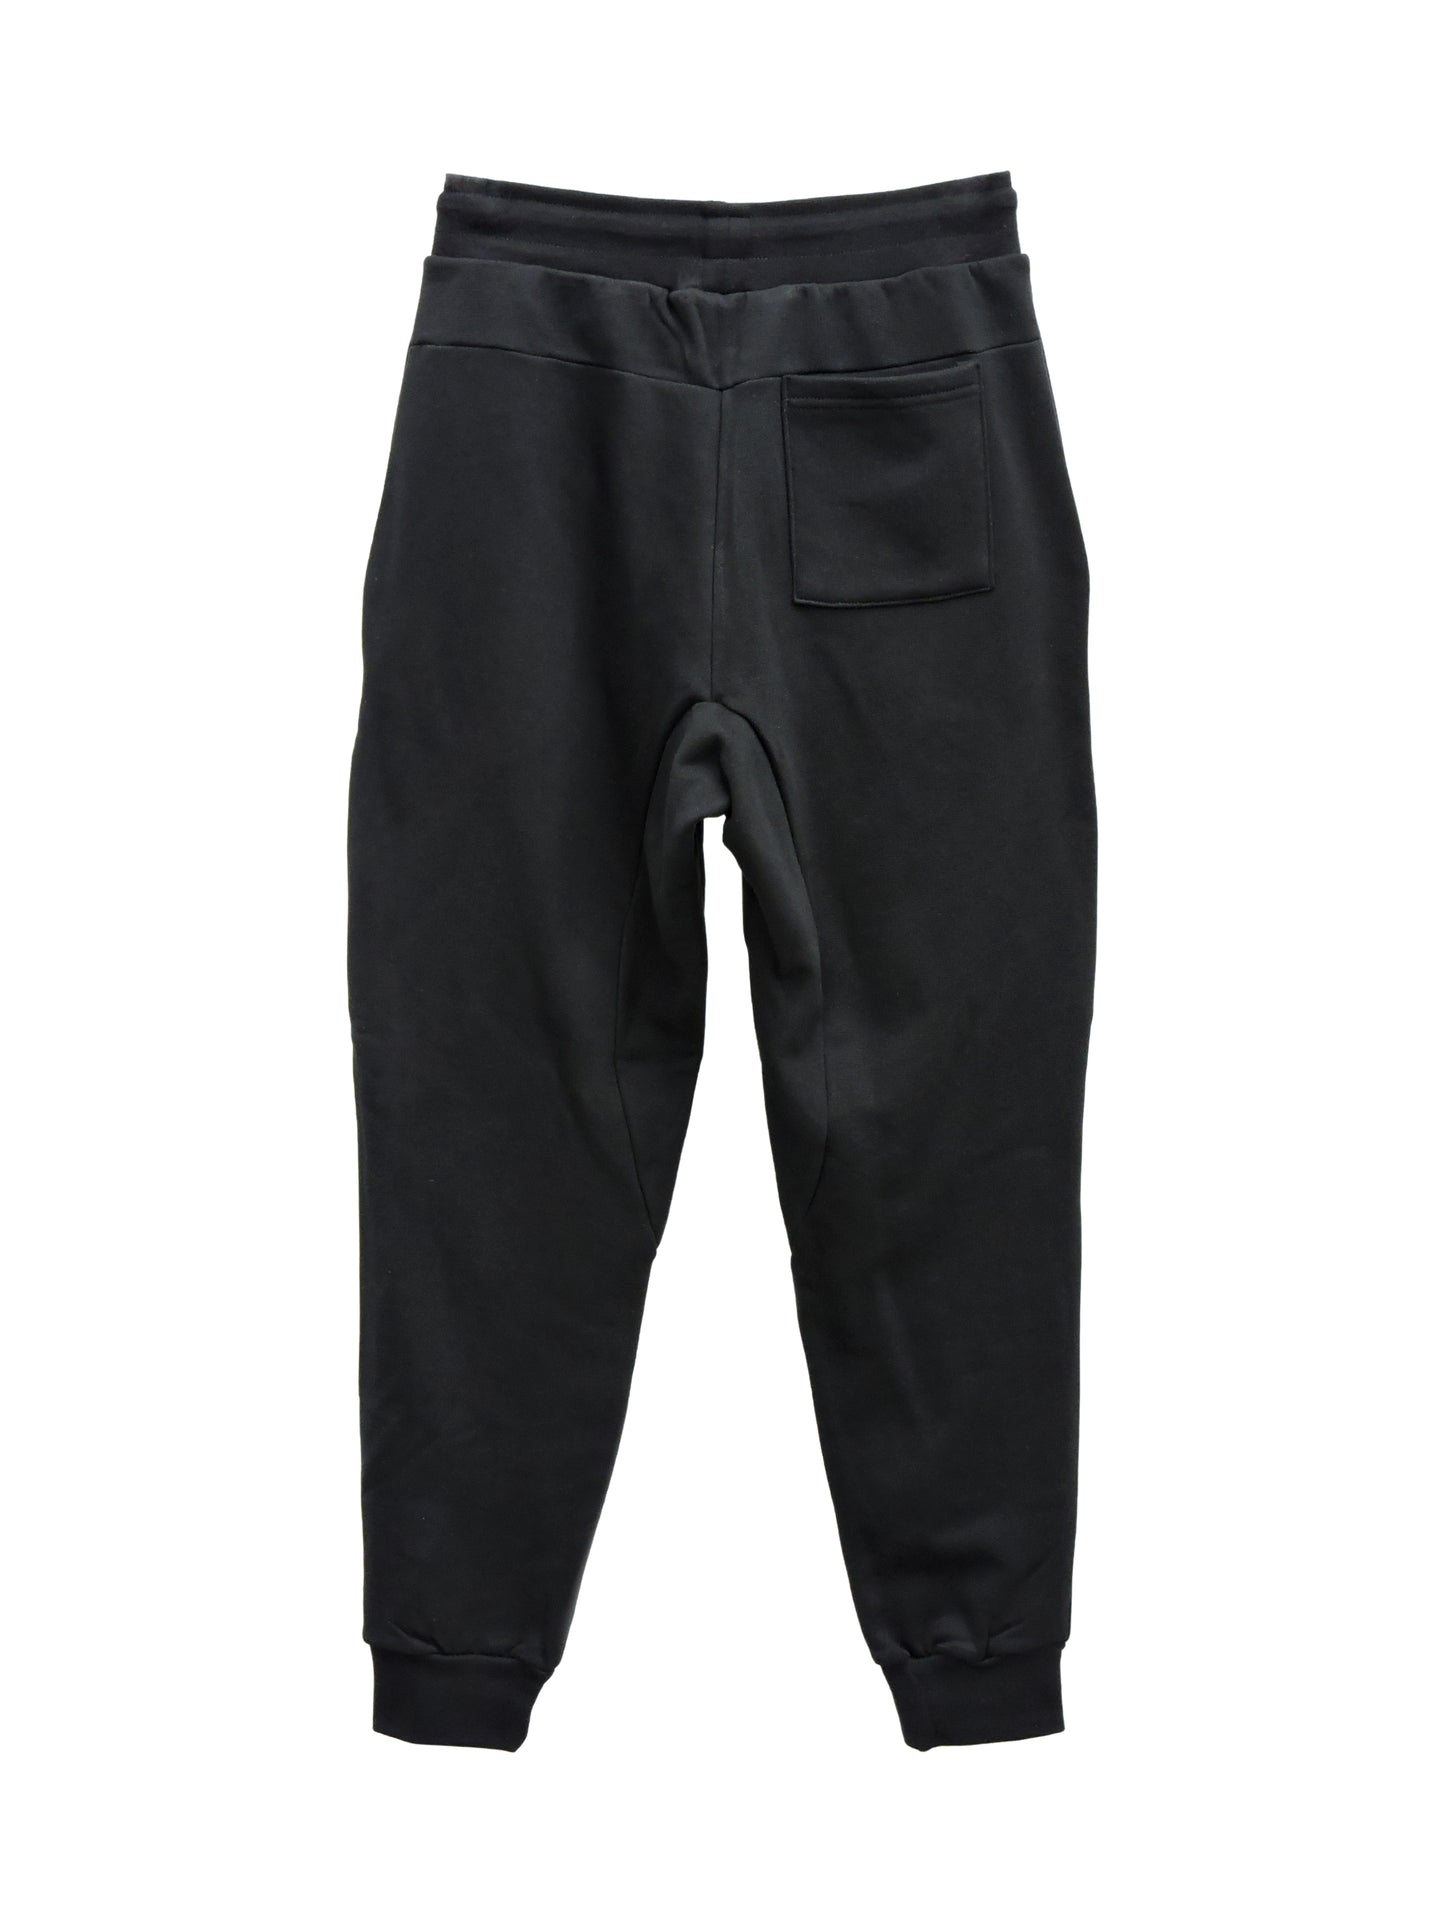 Black French Terry Jogger | 350 GSM Organic Cotton | Wholesale ...